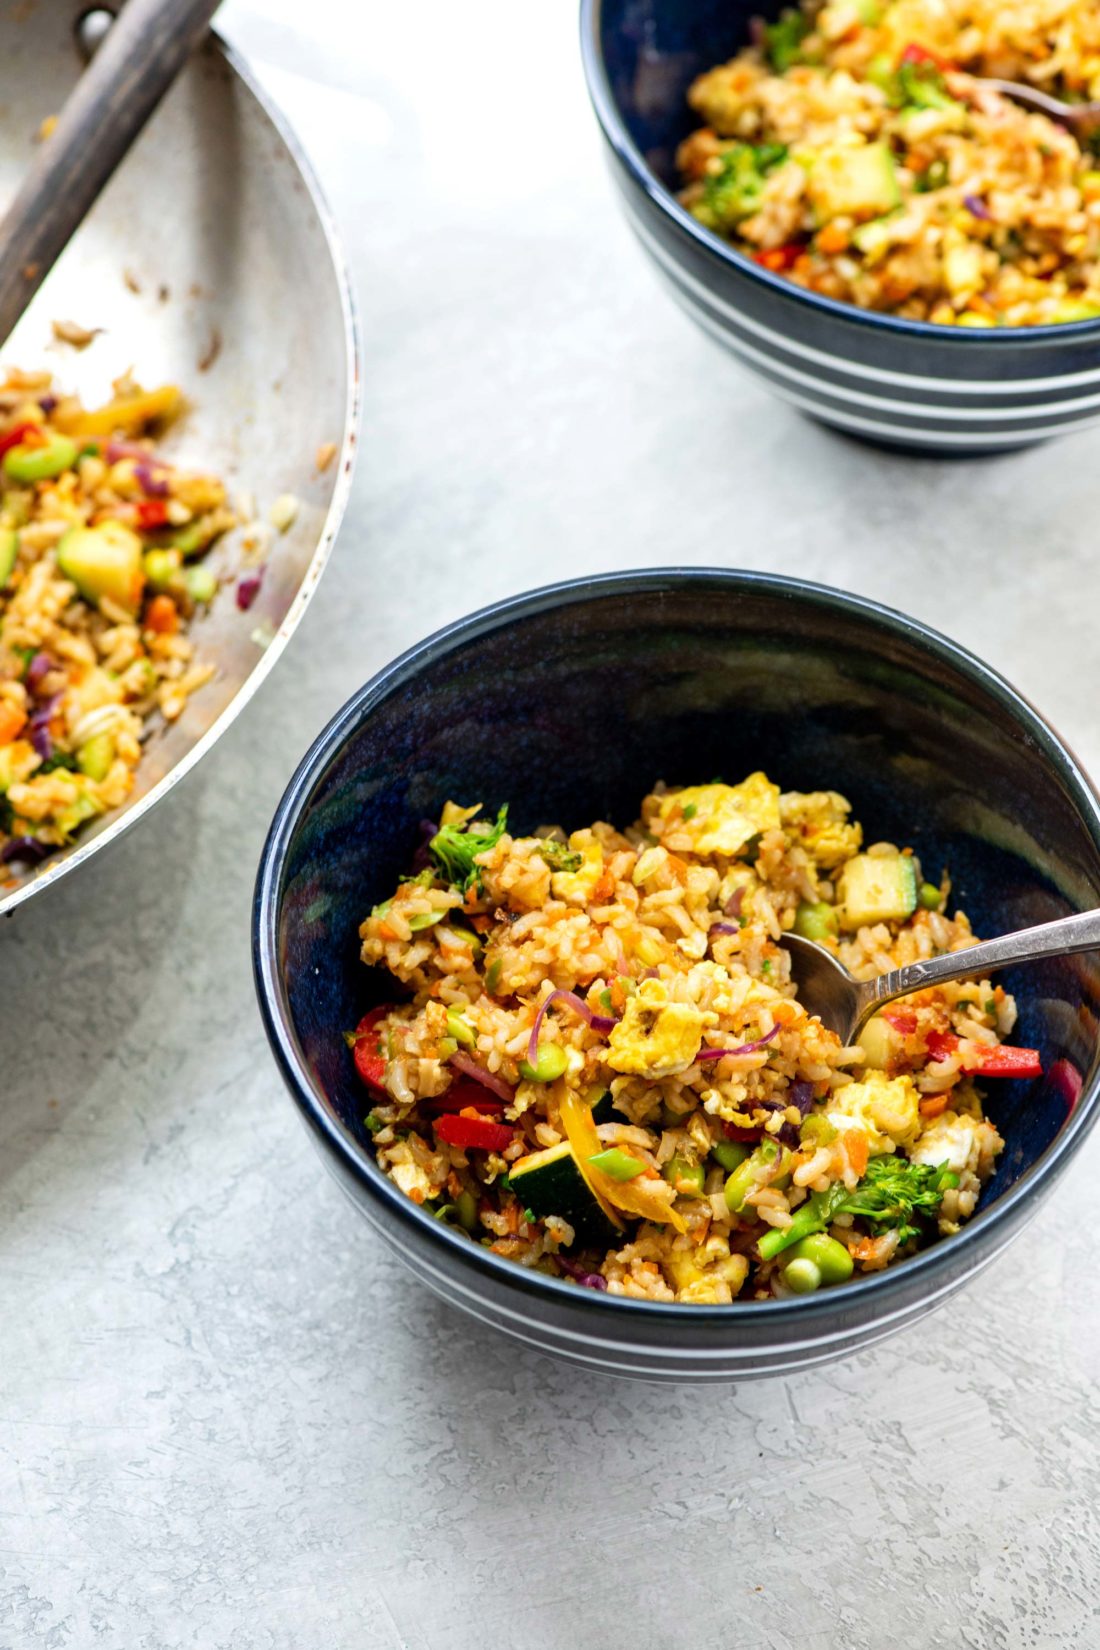 Vegetable Stir Fried Rice in a bowl with a spoon.